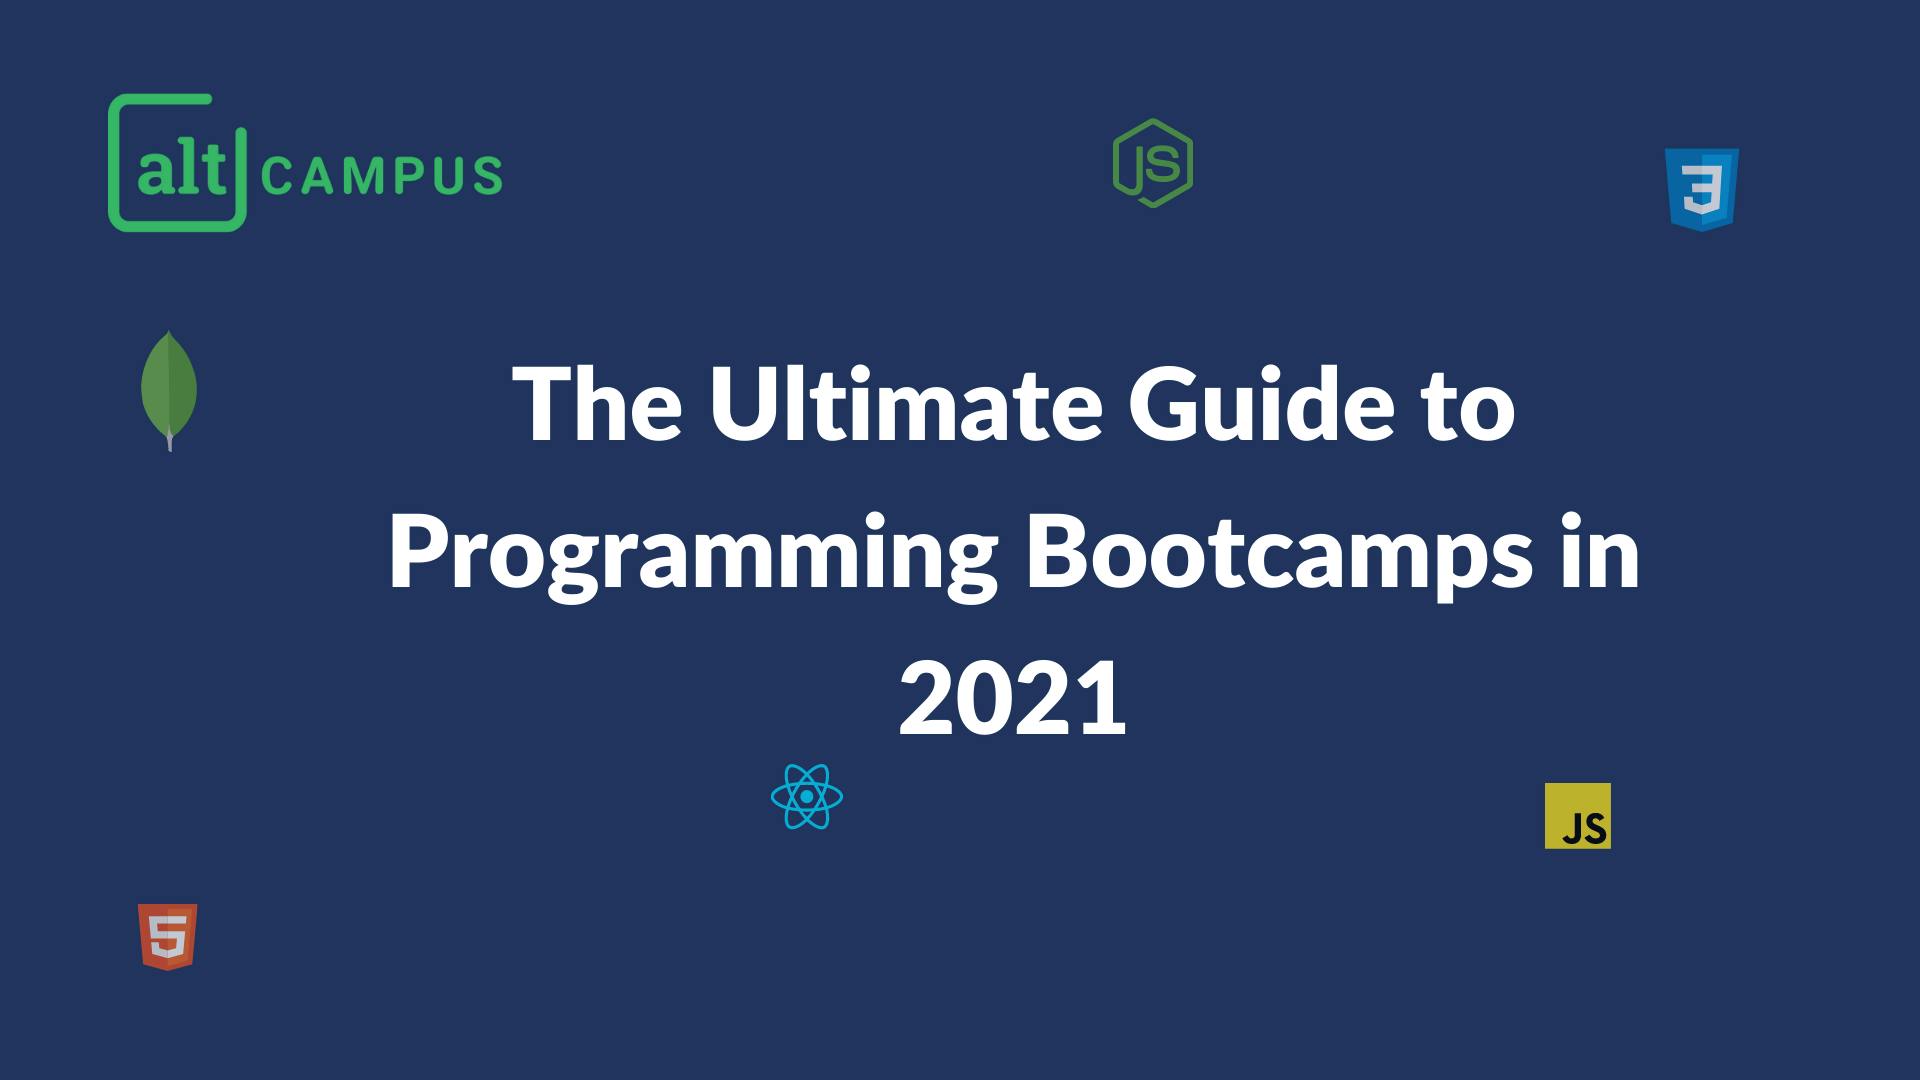 The Ultimate Guide to Programming Bootcamps in 2021